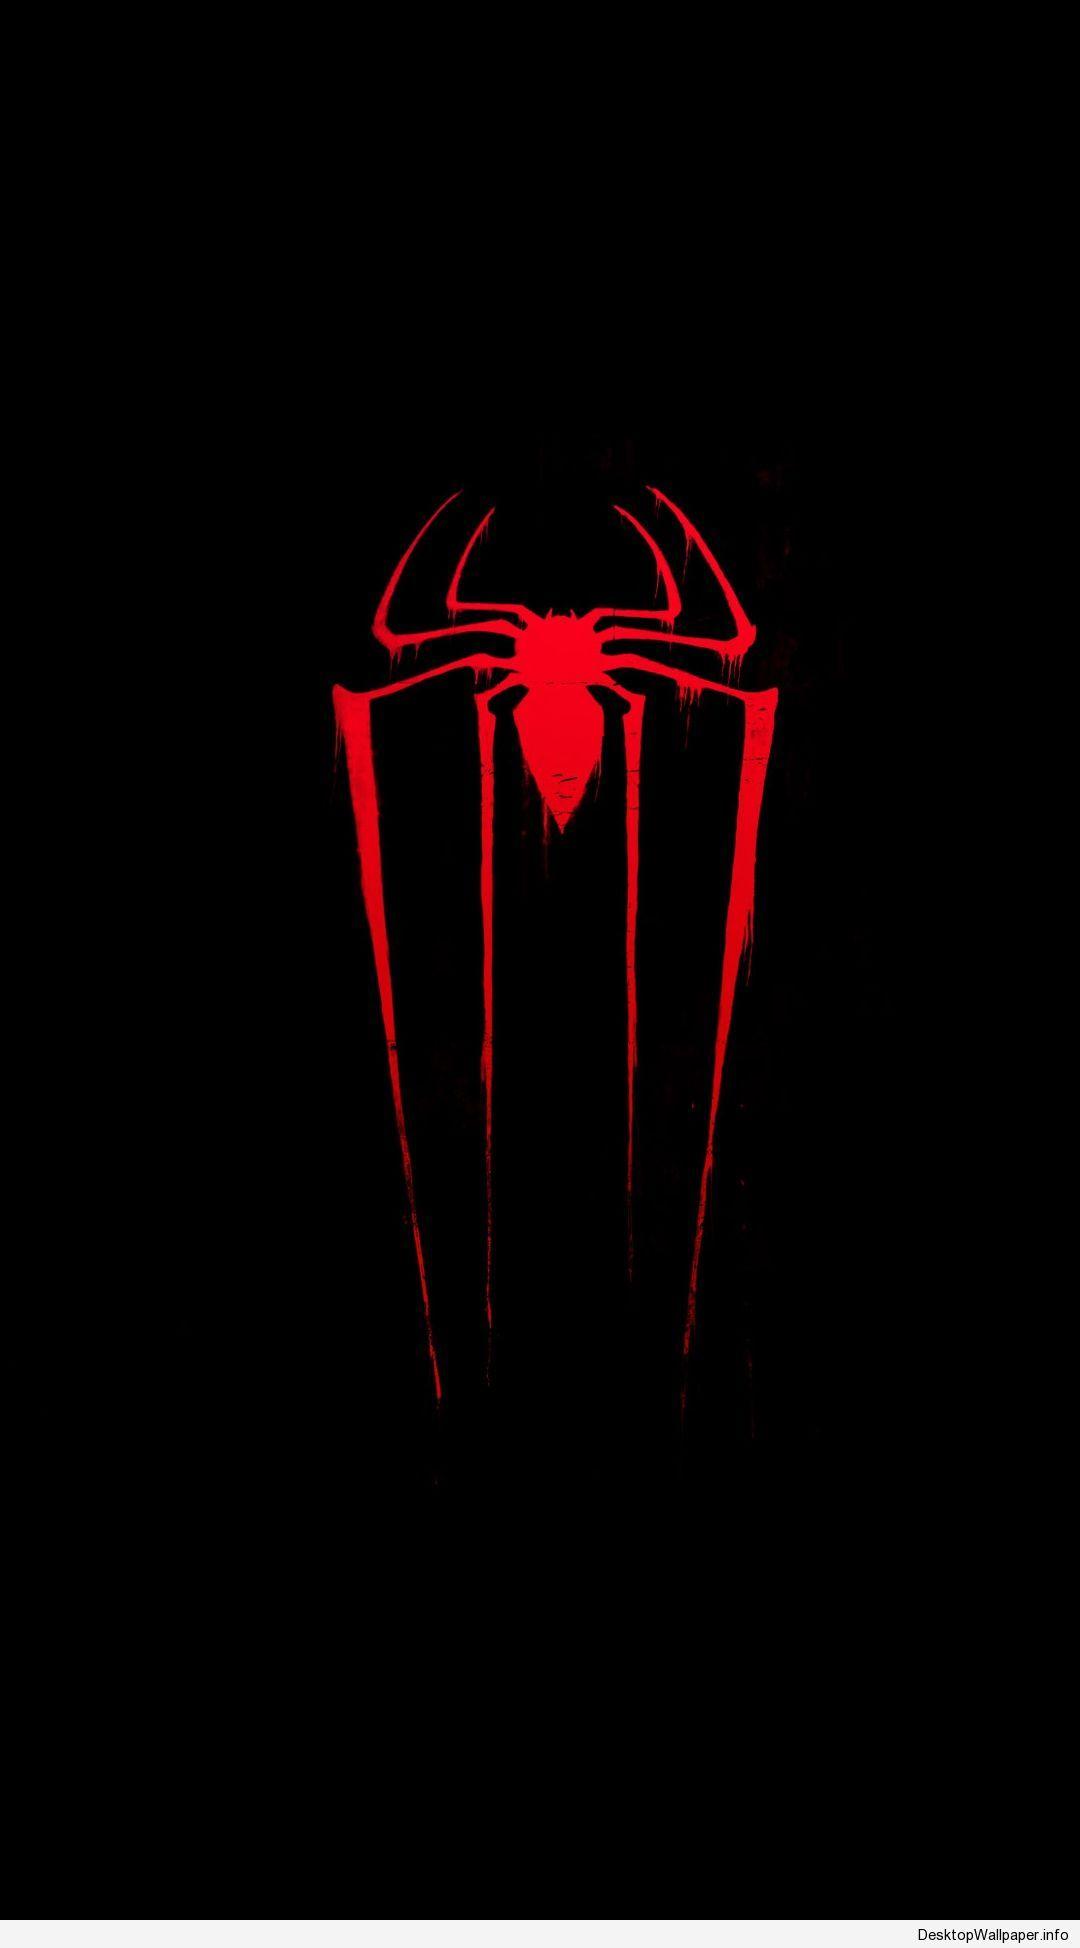 Spider Man Neon Wallpapers Wallpaper Cave See what sanjay thakor (wwwreeyansthakor) has discovered on pinterest, the world's biggest collection of ideas. spider man neon wallpapers wallpaper cave